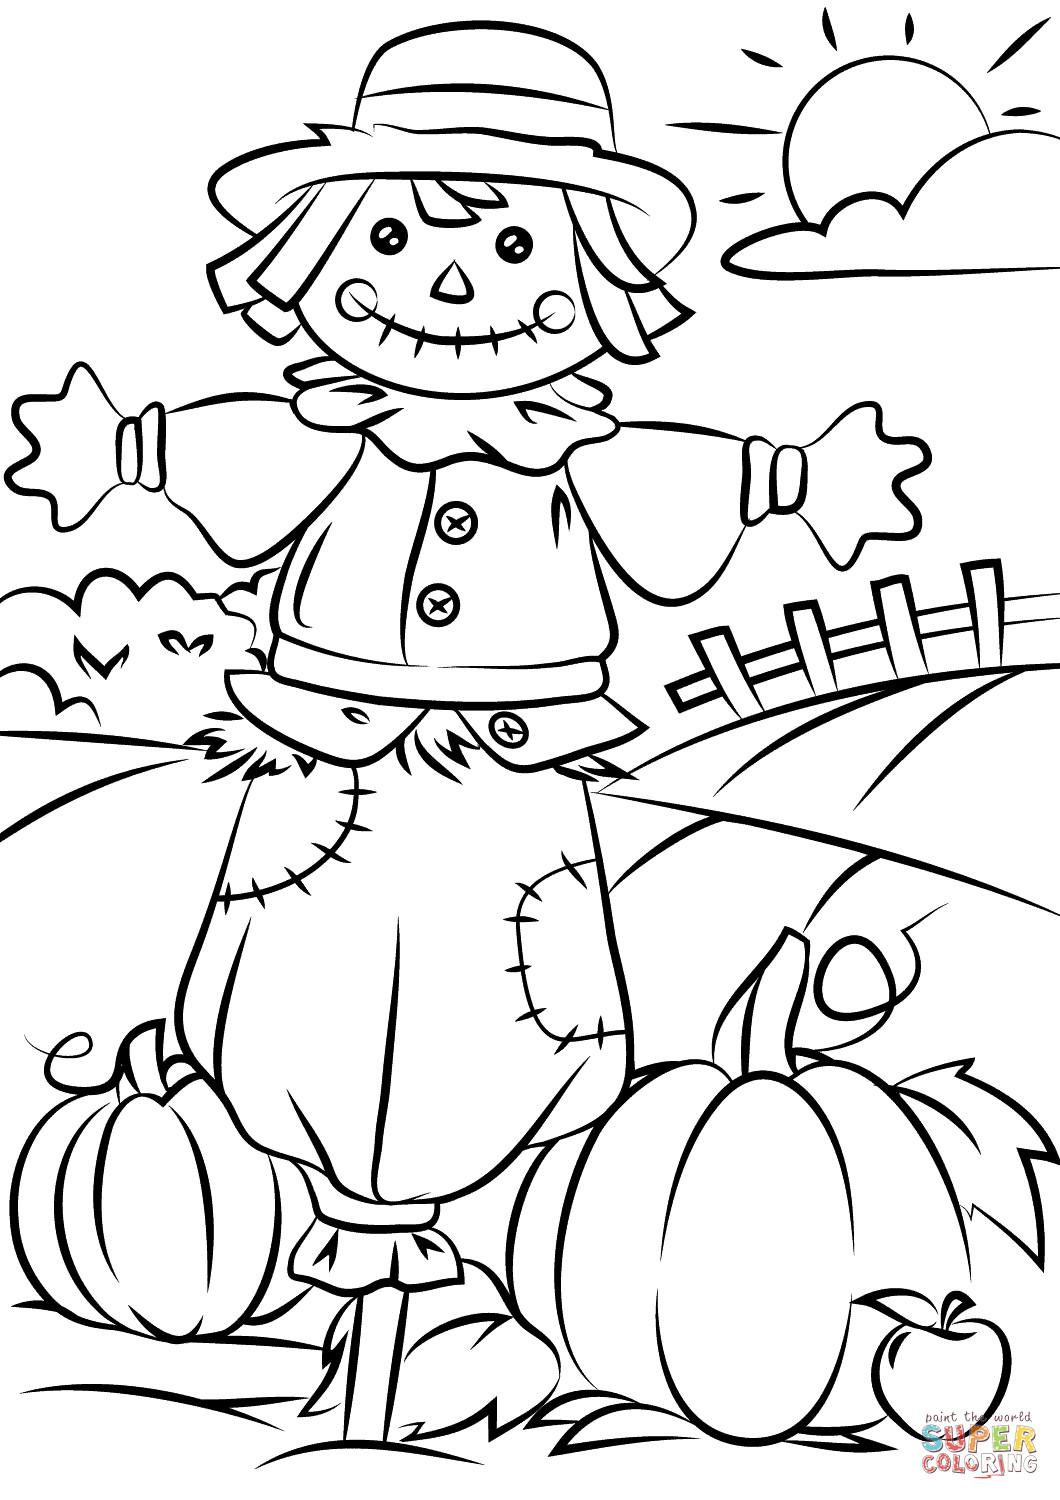 Printable Coloring Pages Fall
 Autumn Scene with Scarecrow coloring page